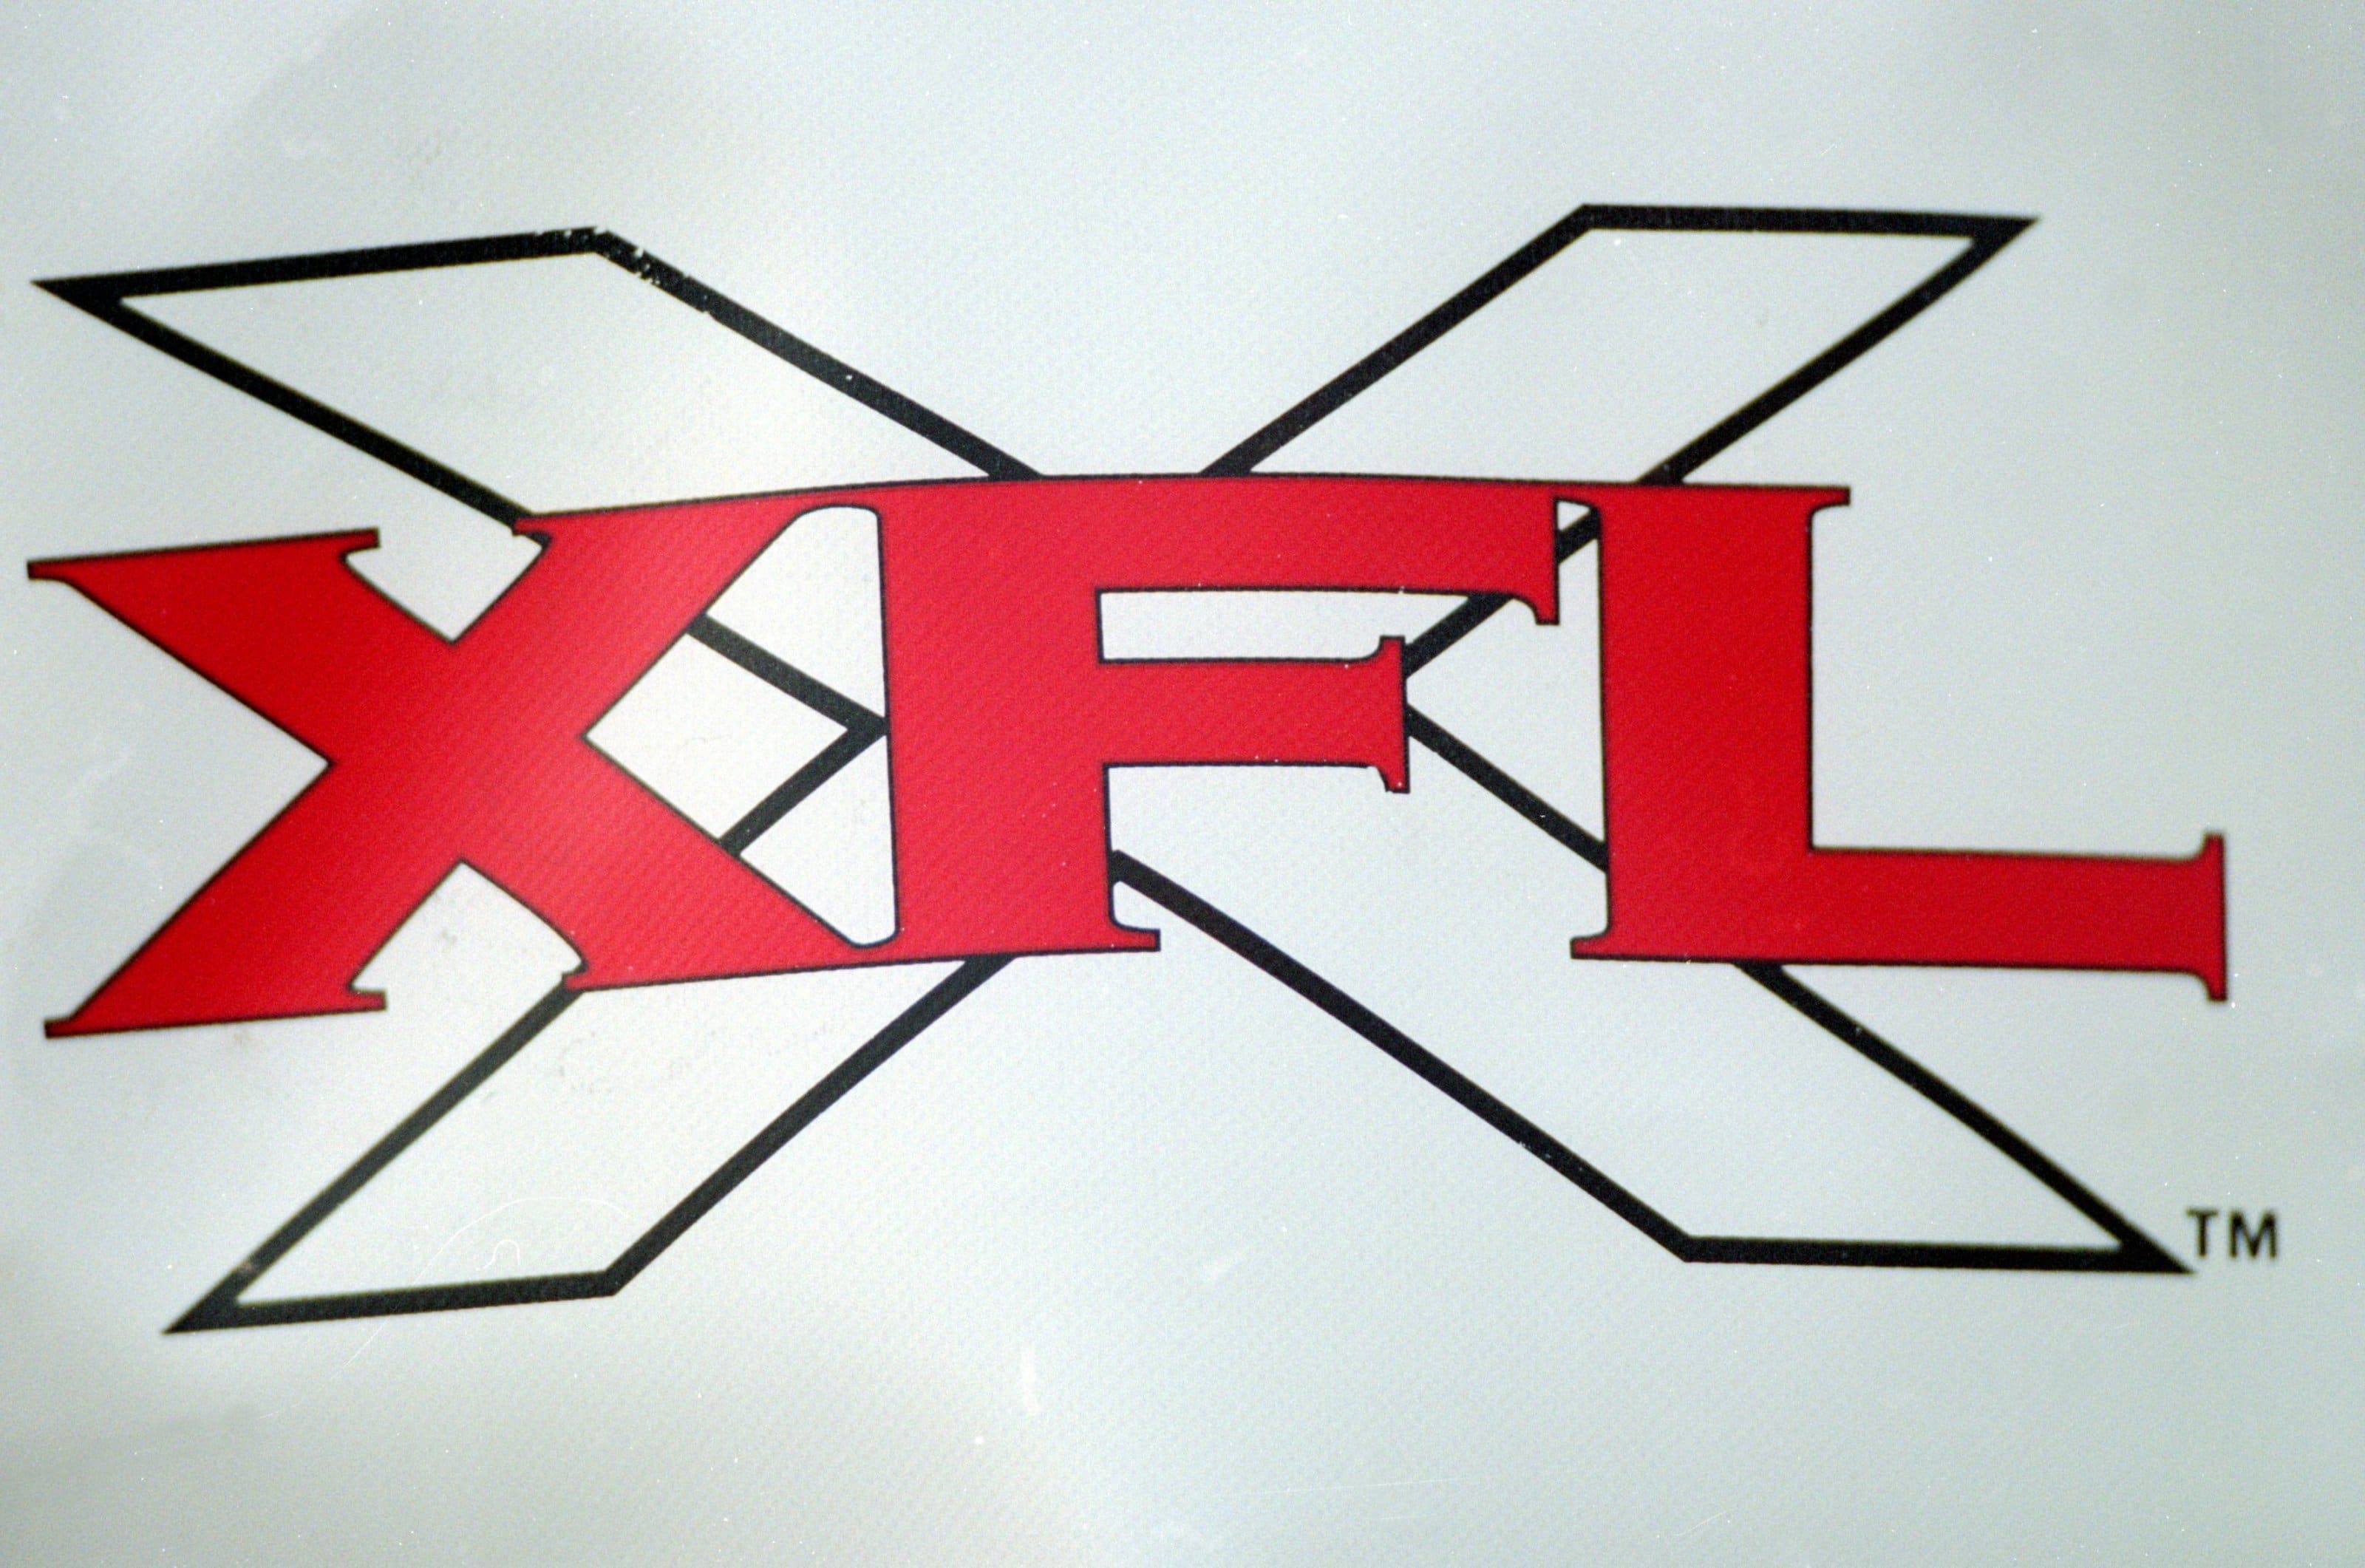 List of Original XFL Teams From 2001: Notable Background Info